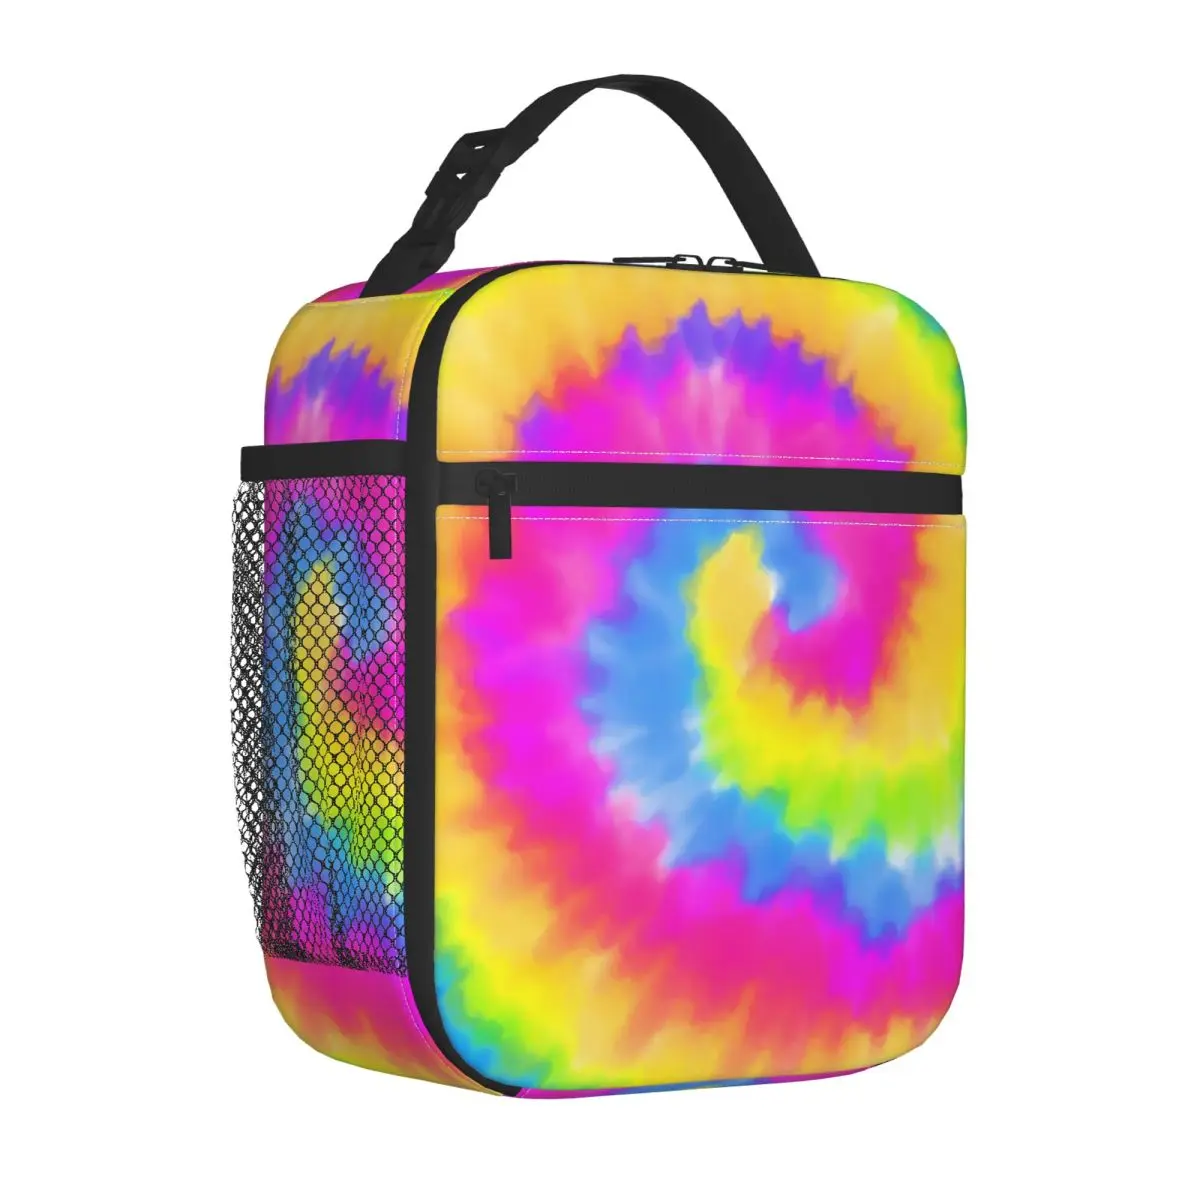 

Spiral Tie Dye Lunch Bag Colorful Swirl Travel Lunch Box For Women Casual Graphic Design Tote Food Bags Waterproof Cooler Bag